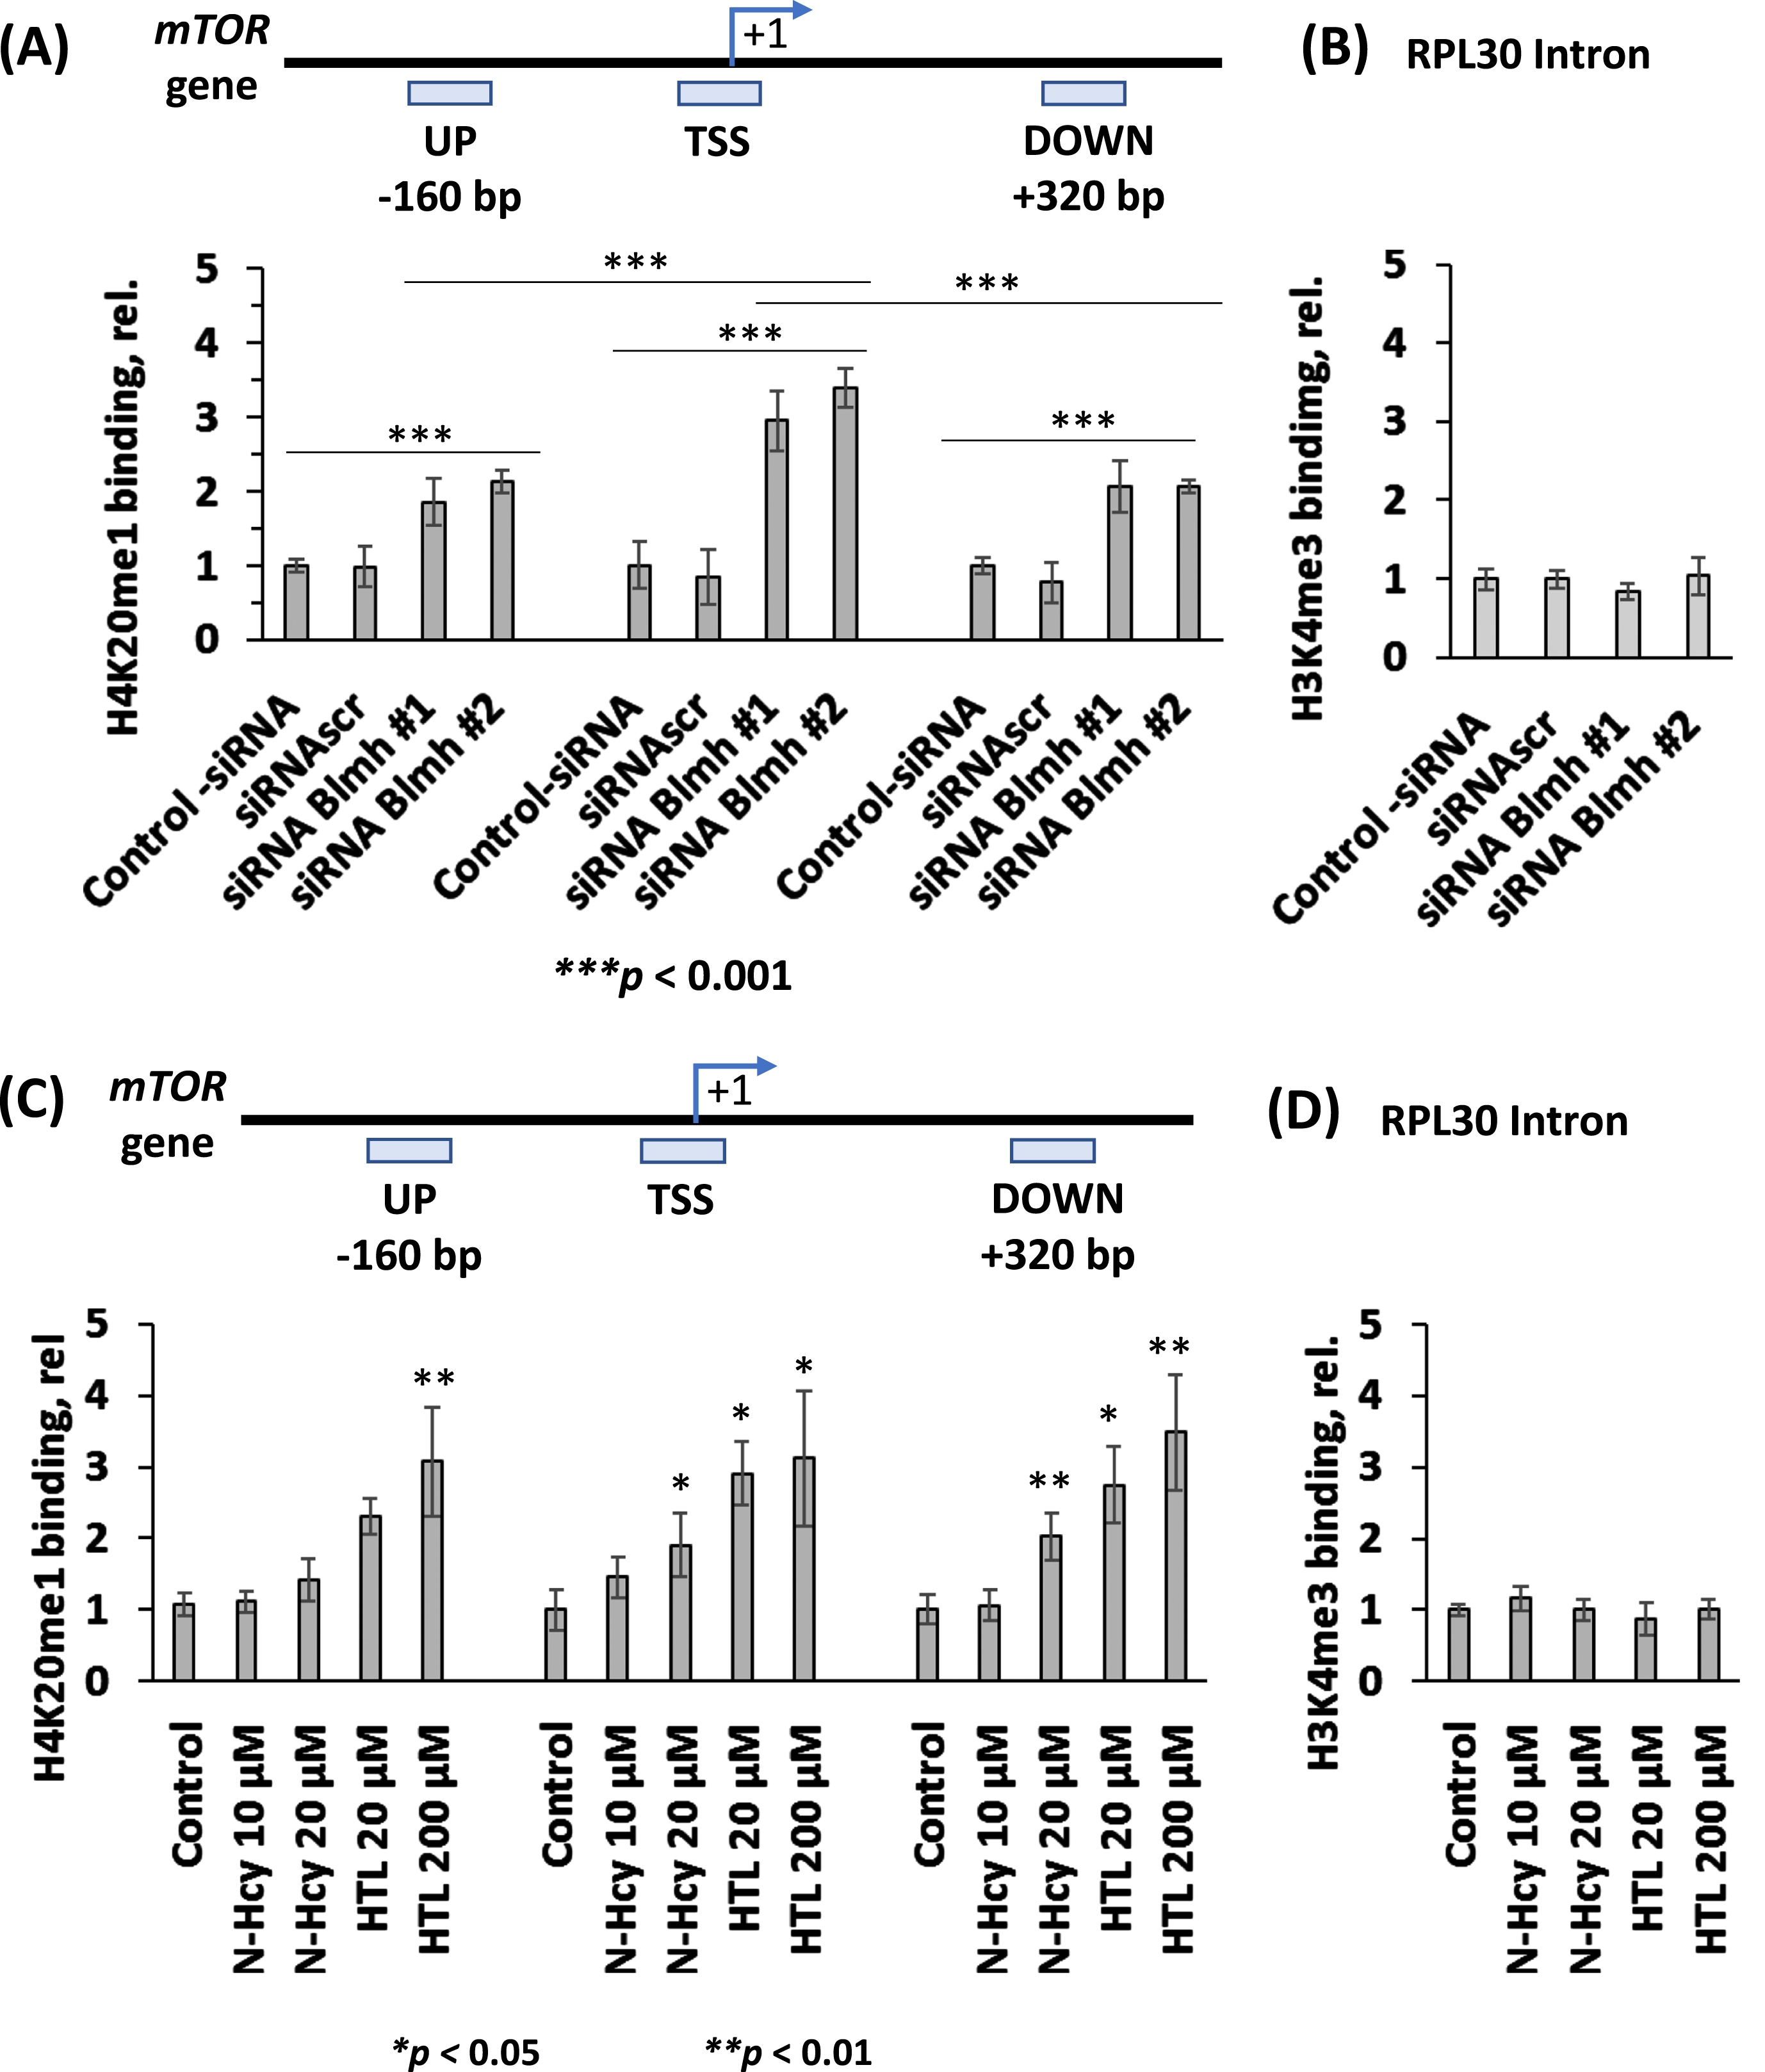 Blmh gene silencing or treatment with Hcy-thiolactone or N-Hcy-protein increases H4K20me1 binding at the mTOR promoter in mouse neuroblastoma N2a-APPswe cells. A) CUT&RUN assays with anti-H4K20me1 antibody show specific binding of H4K20me1 at the transcription start site (TSS) of the mTOR gene as well as downstream and upstream sites in Blmh siRNA-silenced N2a-APPswe cells. Bar graphs show the relative H4K20me1 binding at the indicated regions of the mTOR gene in N2a-APPswe cells transfected with two different siRNAs targeting the Blmh gene (siRNA Blmh #1 and #2). Transfections without siRNA (Control -siRNA) or with scrambled siRNA (siRNAscr) were used as controls. B) Control CUT&RUN experiment with anti-H3K4me3 antibody shows that Blmh gene-silencing did not affect the binding of H3K4me3 at the Rpl30 intron. RT-qPCR was conducted on the input and precipitated DNA fragments. Data are averages of three independent experiments. C) N2a-APPswe cells were treated with the indicated concentrations of N-Hcy-protein or Hcy-thiolactone (HTL) for 24 h at 37°C. Untreated cells were used as controls. The CUT&RUN assays with anti-H4K20me1 antibody show that H4K20me1 binds to the transcription start site (TSS) of the mTOR gene as well as downstream and upstream sites. Bar graphs show relative H4K20me1 binding at the indicated regions of the mTOR gene. D) A control CUT&RUN experiment with anti-H3K4me3 antibody shows that Hcy-thiolactone and N-Hcy-protein did not affect the binding of H3K4me3 at the Rpl30 intron. Panels C and D were reproduced with permission from [51]. RT-qPCR was conducted on the input and precipitated DNA fragments. Data are mean ± SD of three biologically independent experiments. p-values were calculated by one-way ANOVA with Tukey’s multiple comparisons test. *p<0.05, **p<0.01, ***p<0.001.